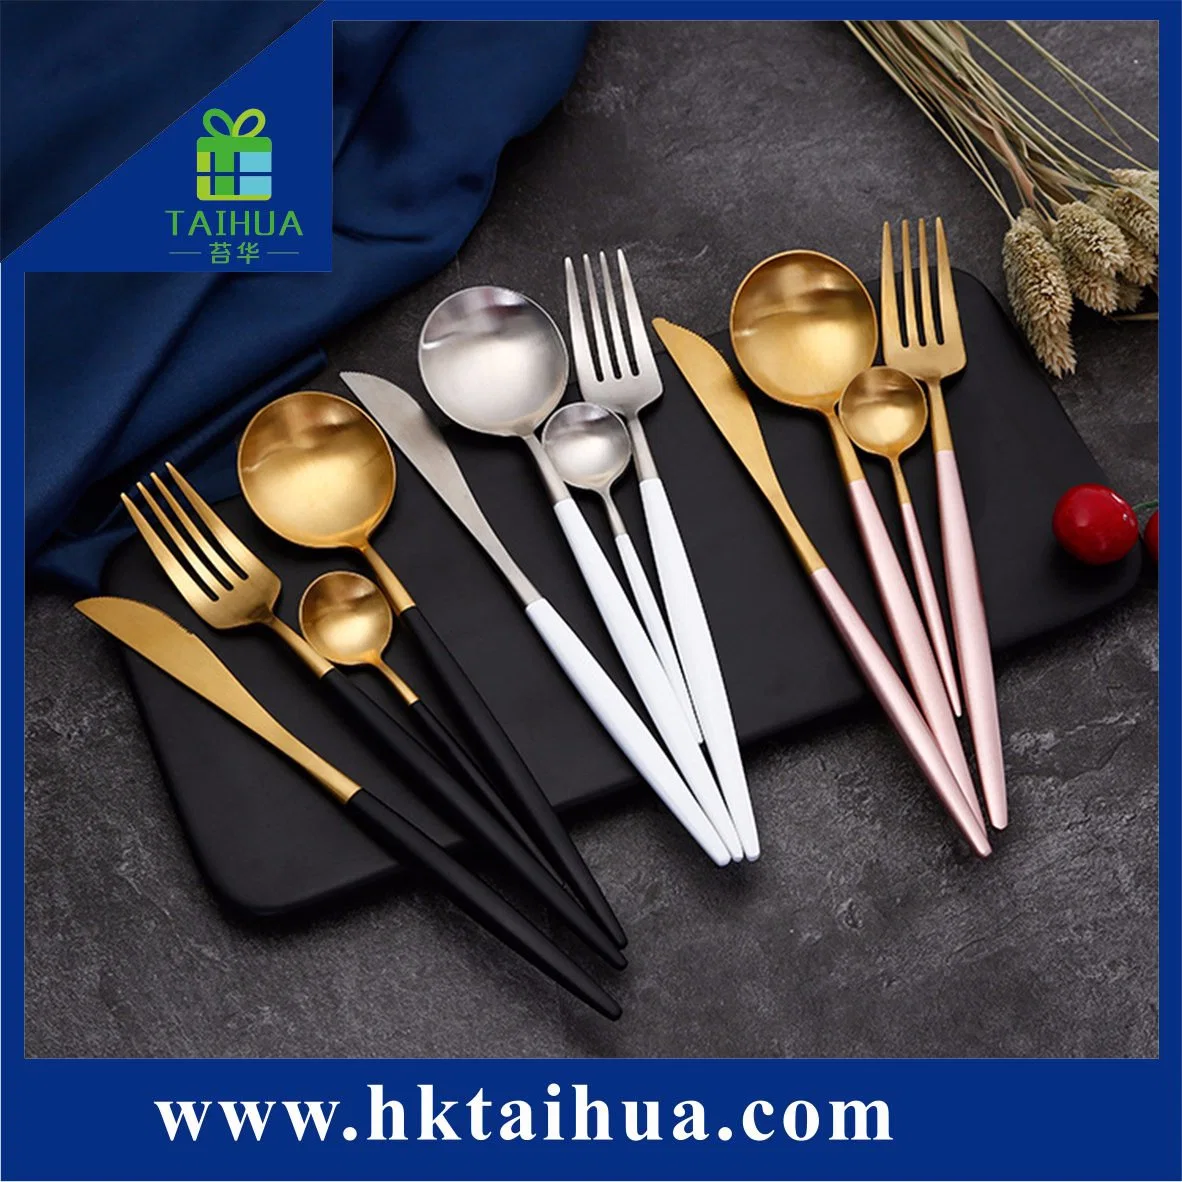 High Class Stainless Steel Flatware Tableware Cutlery, , Forks and Spoon Set, Gift Set